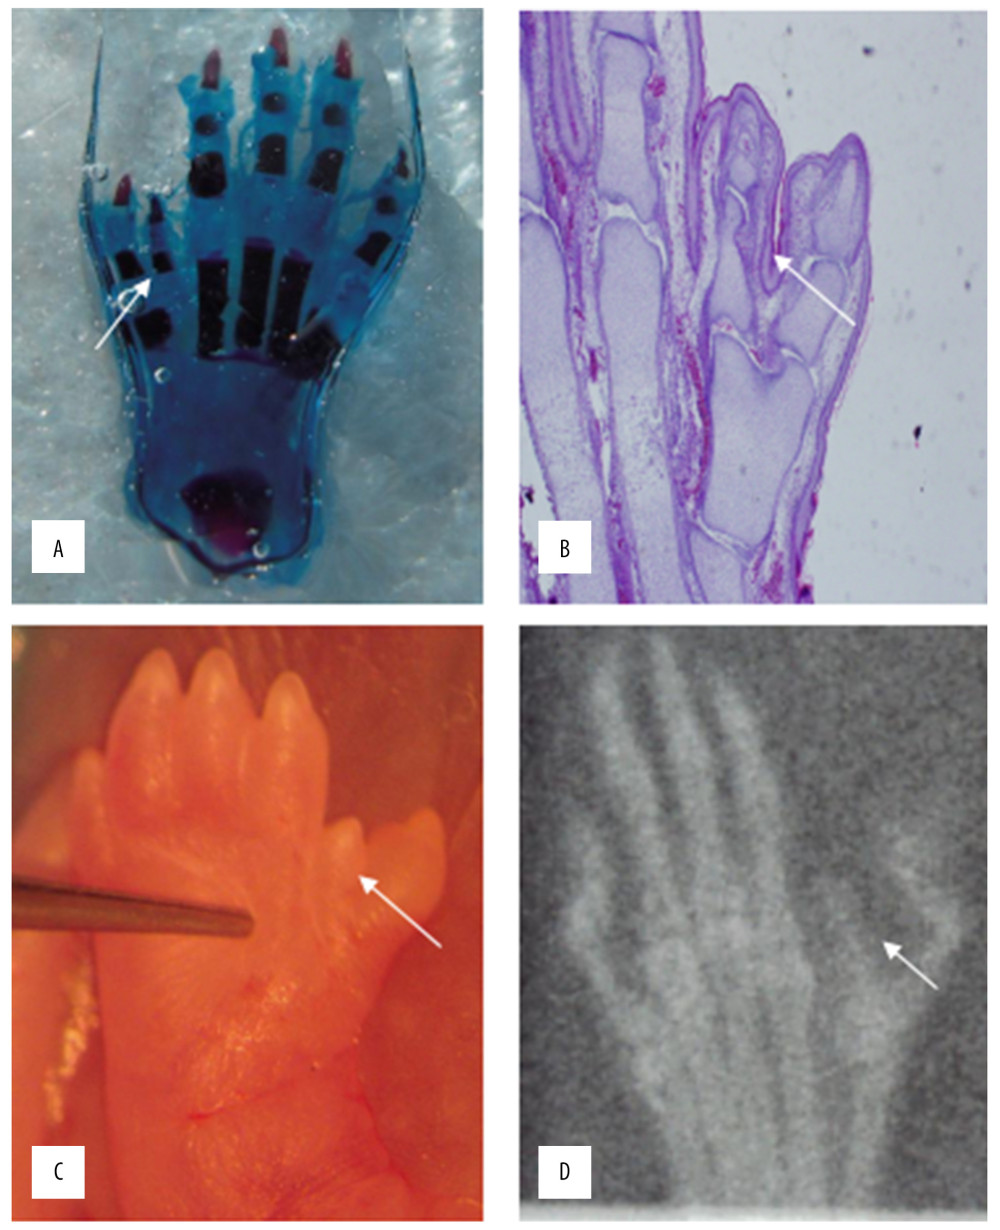 HE staining (A) bone cartilage staining (B) the picture of the deformed hand (C) X-ray (D). All those images of the thumb polydactyly rats were used to observe limb morphology and newborn redundant bone.